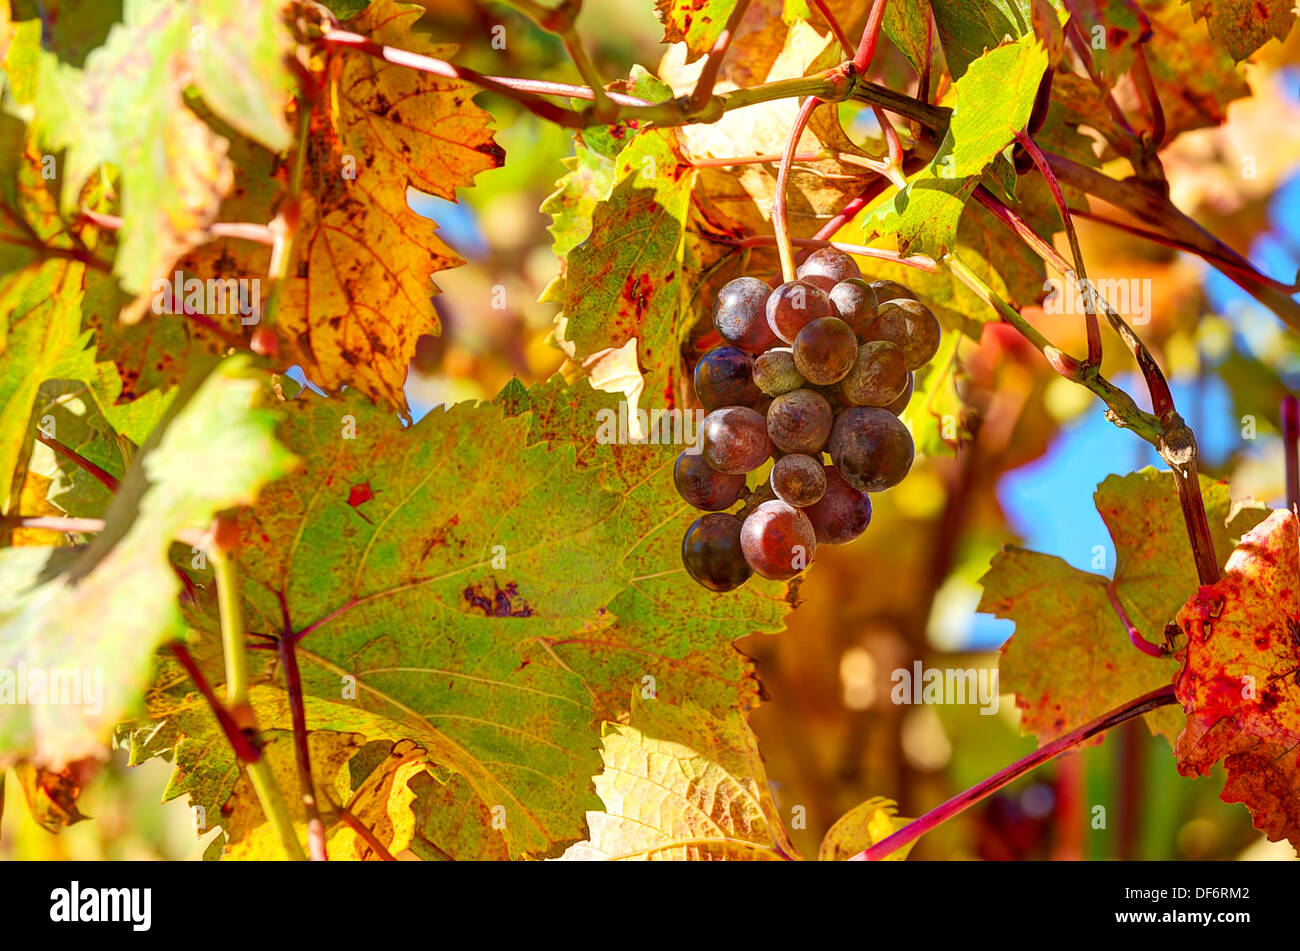 Closeup image of ripe grape among red,yellow and orange leaves on autumnal vineyard in Piedmont, Northern Italy. Stock Photo